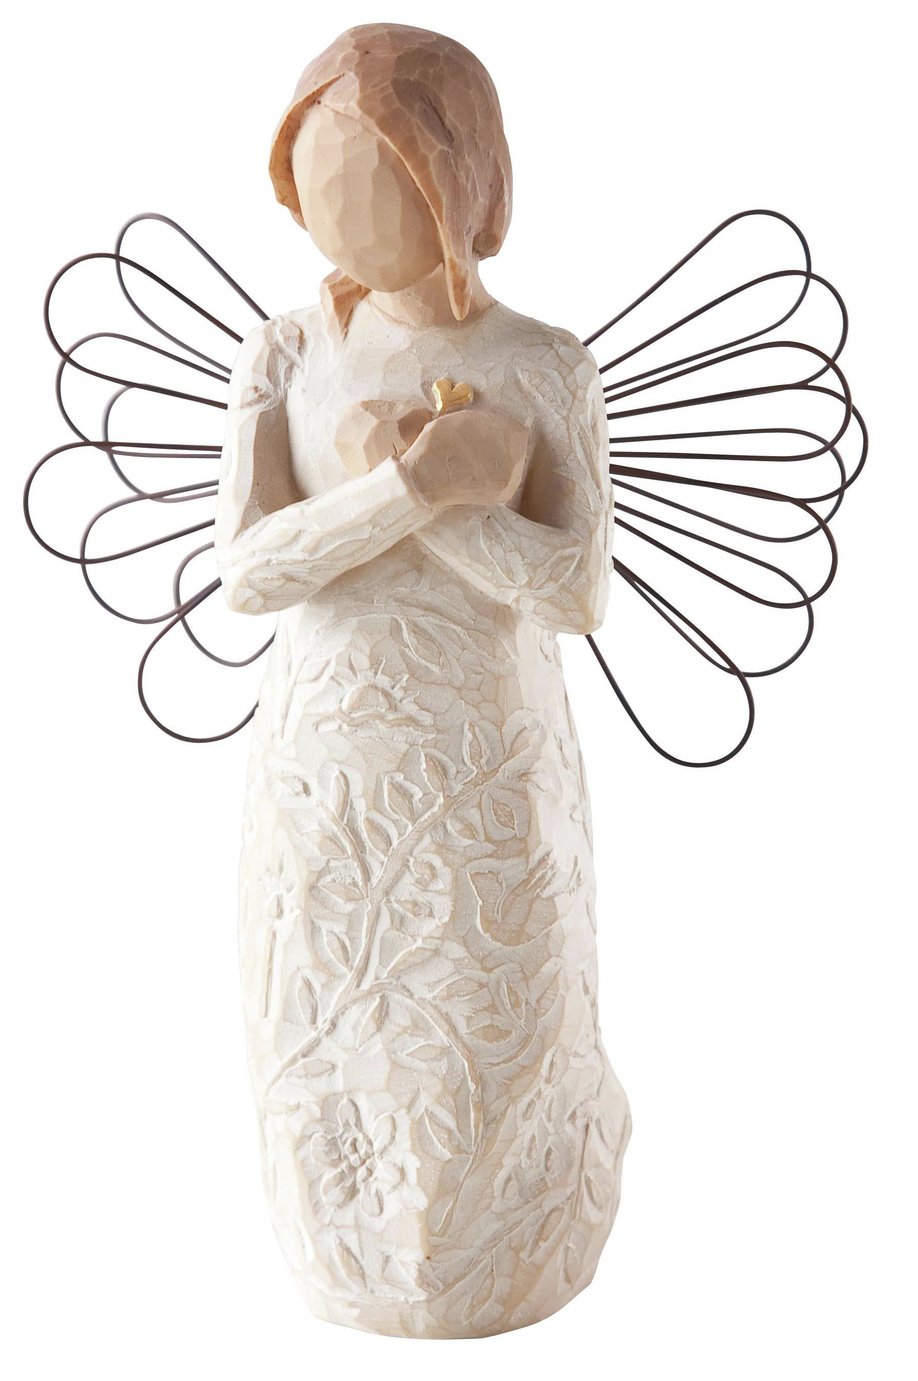 Willow Tree Remembrance Figurine